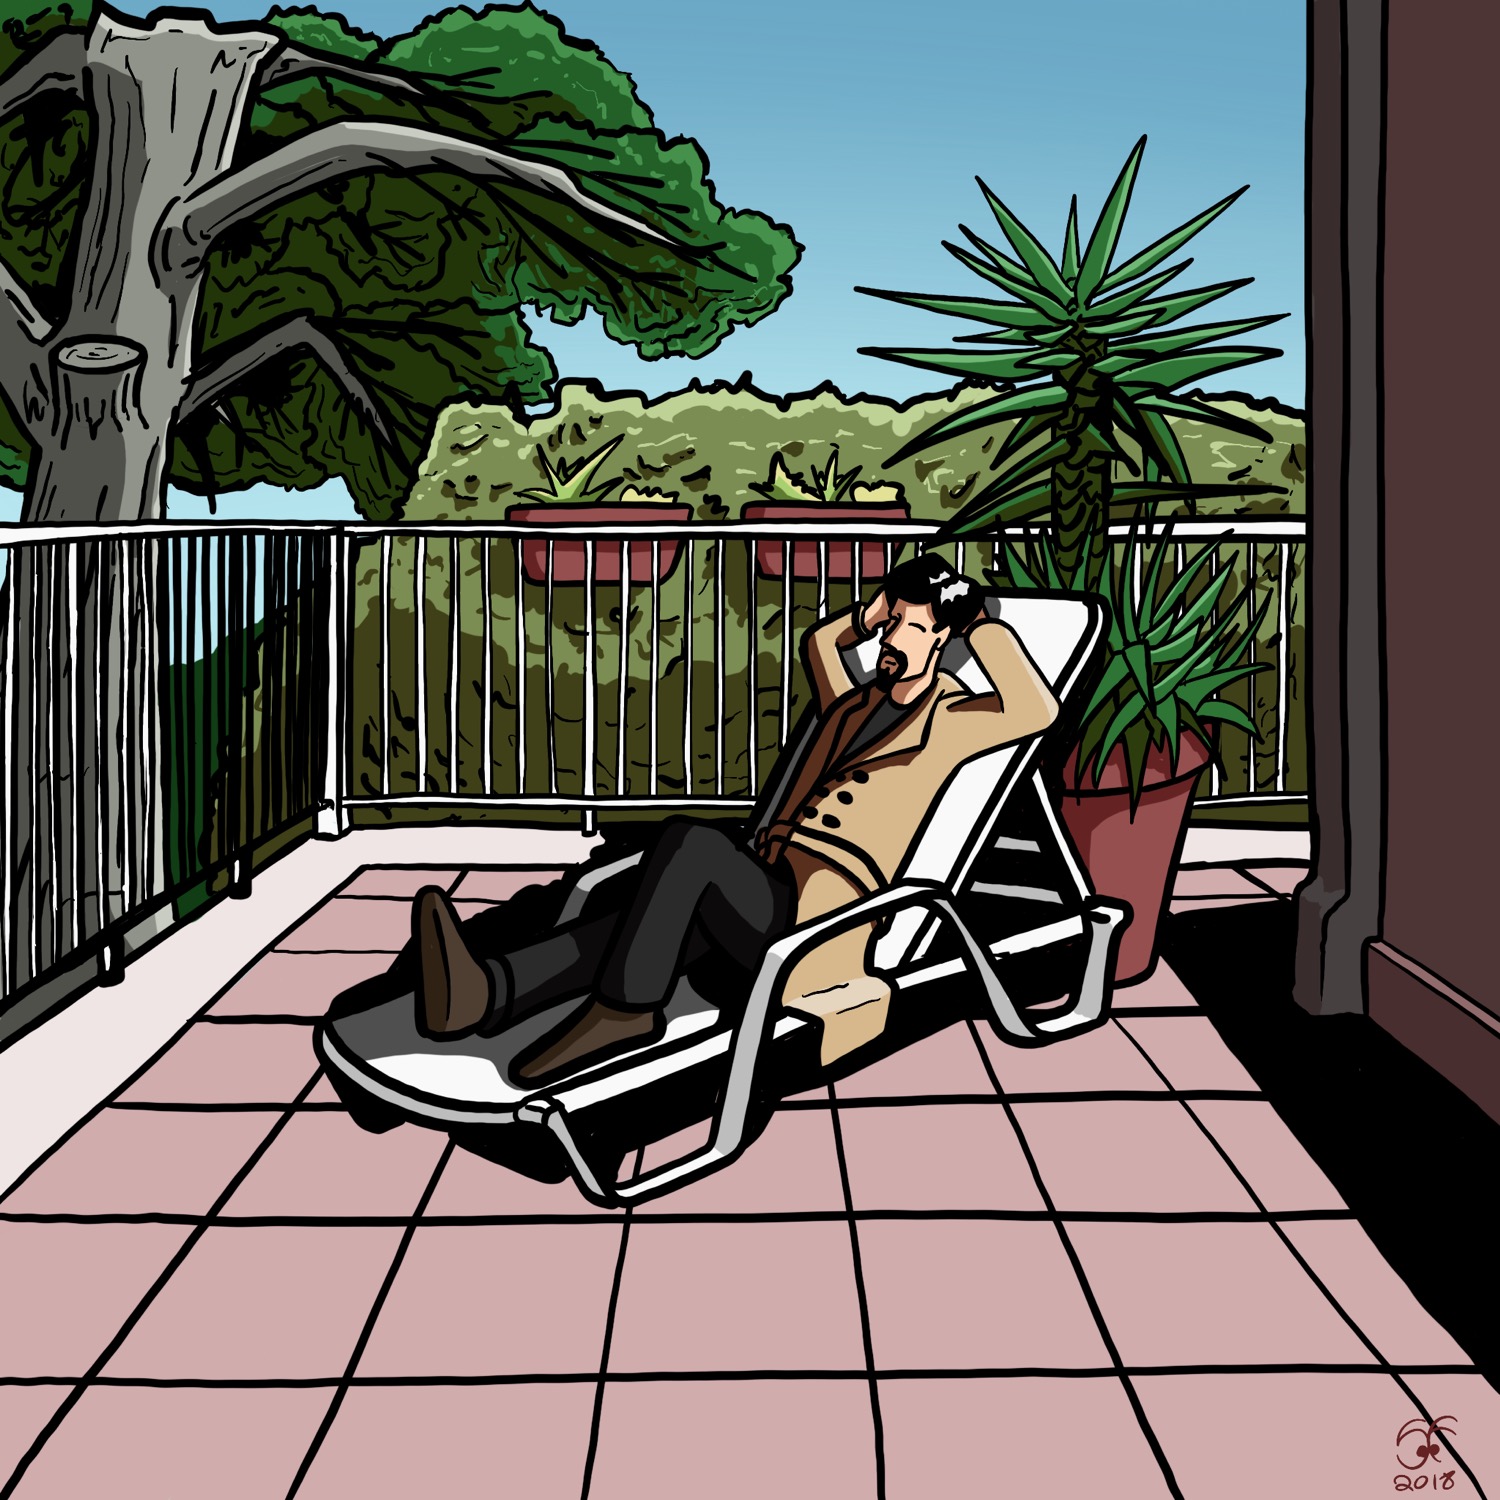 Illustration of a man in a trench coat lounging on a sun lounger in Veste, Italy on a balcony surrounded by trees.